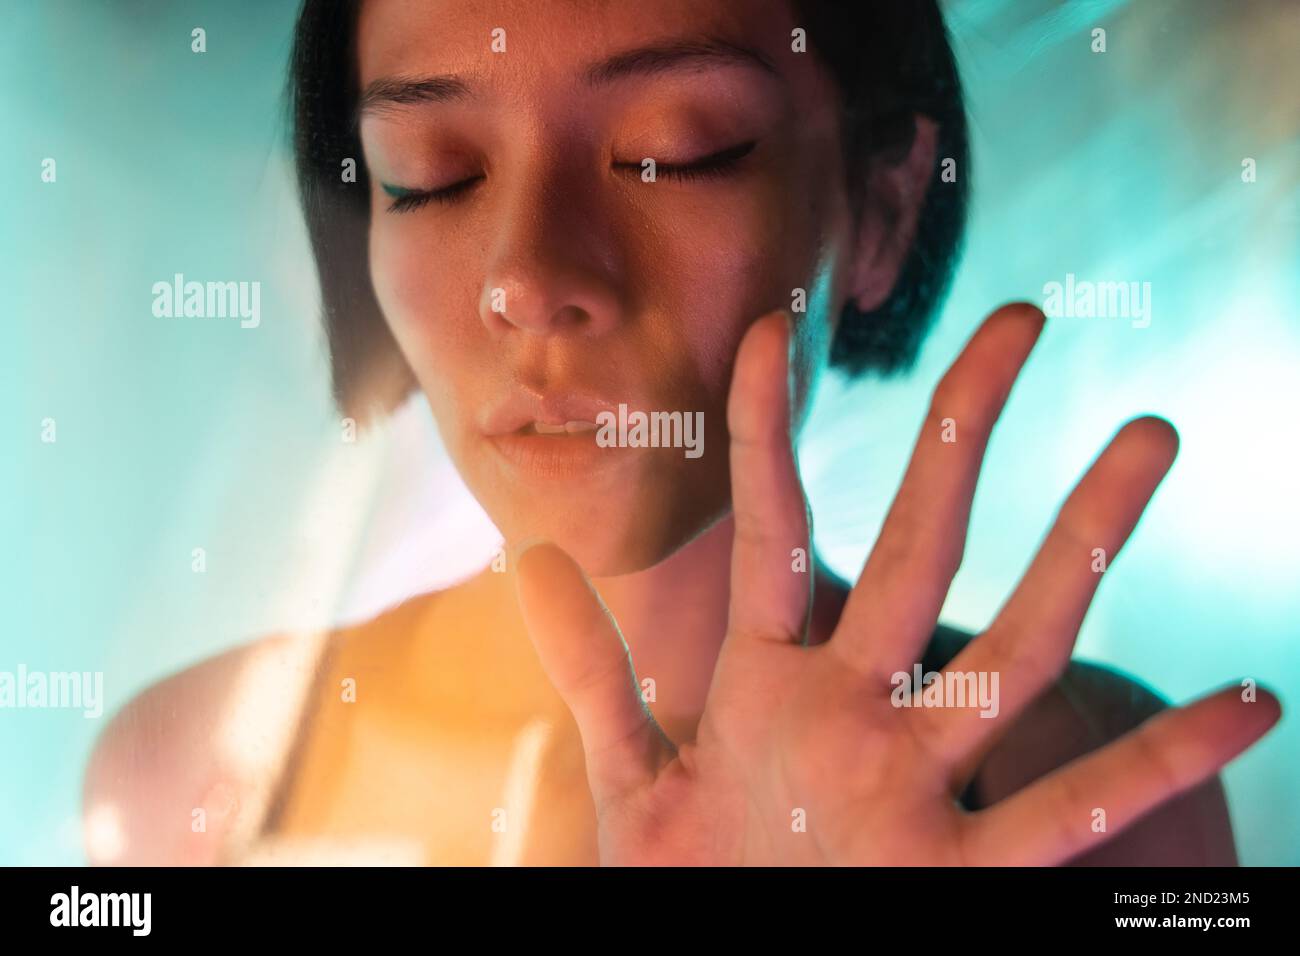 Through glass of confident young female with short hair and eyes closed while showing stop gesture Stock Photo